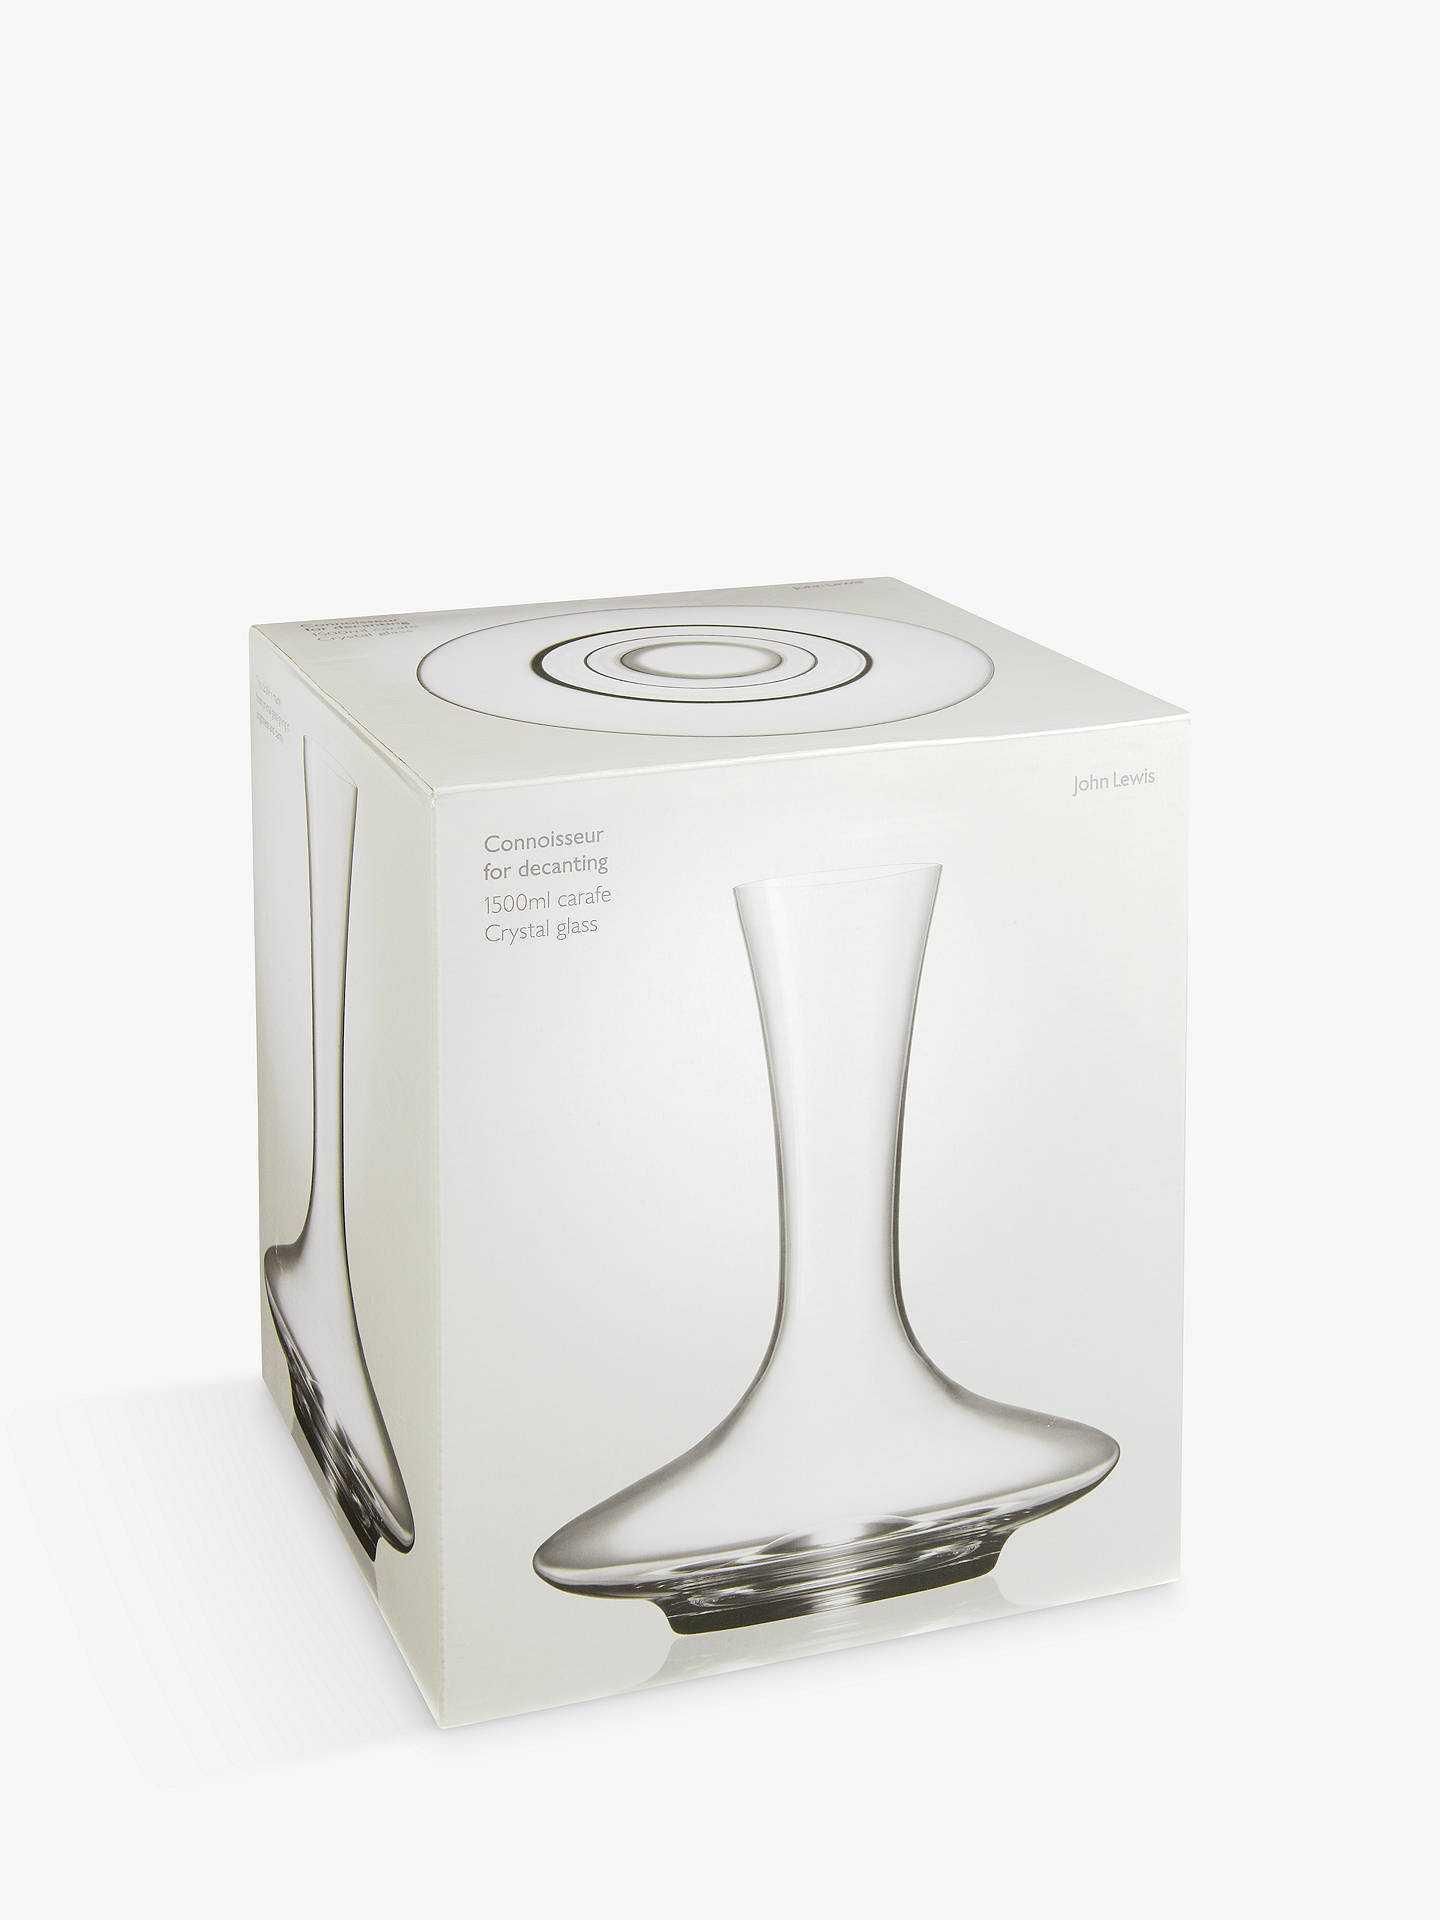 Rrp £40 Each 3 Boxed Connoisseur For Decanting 1500Ml Crystal Glass Decanter